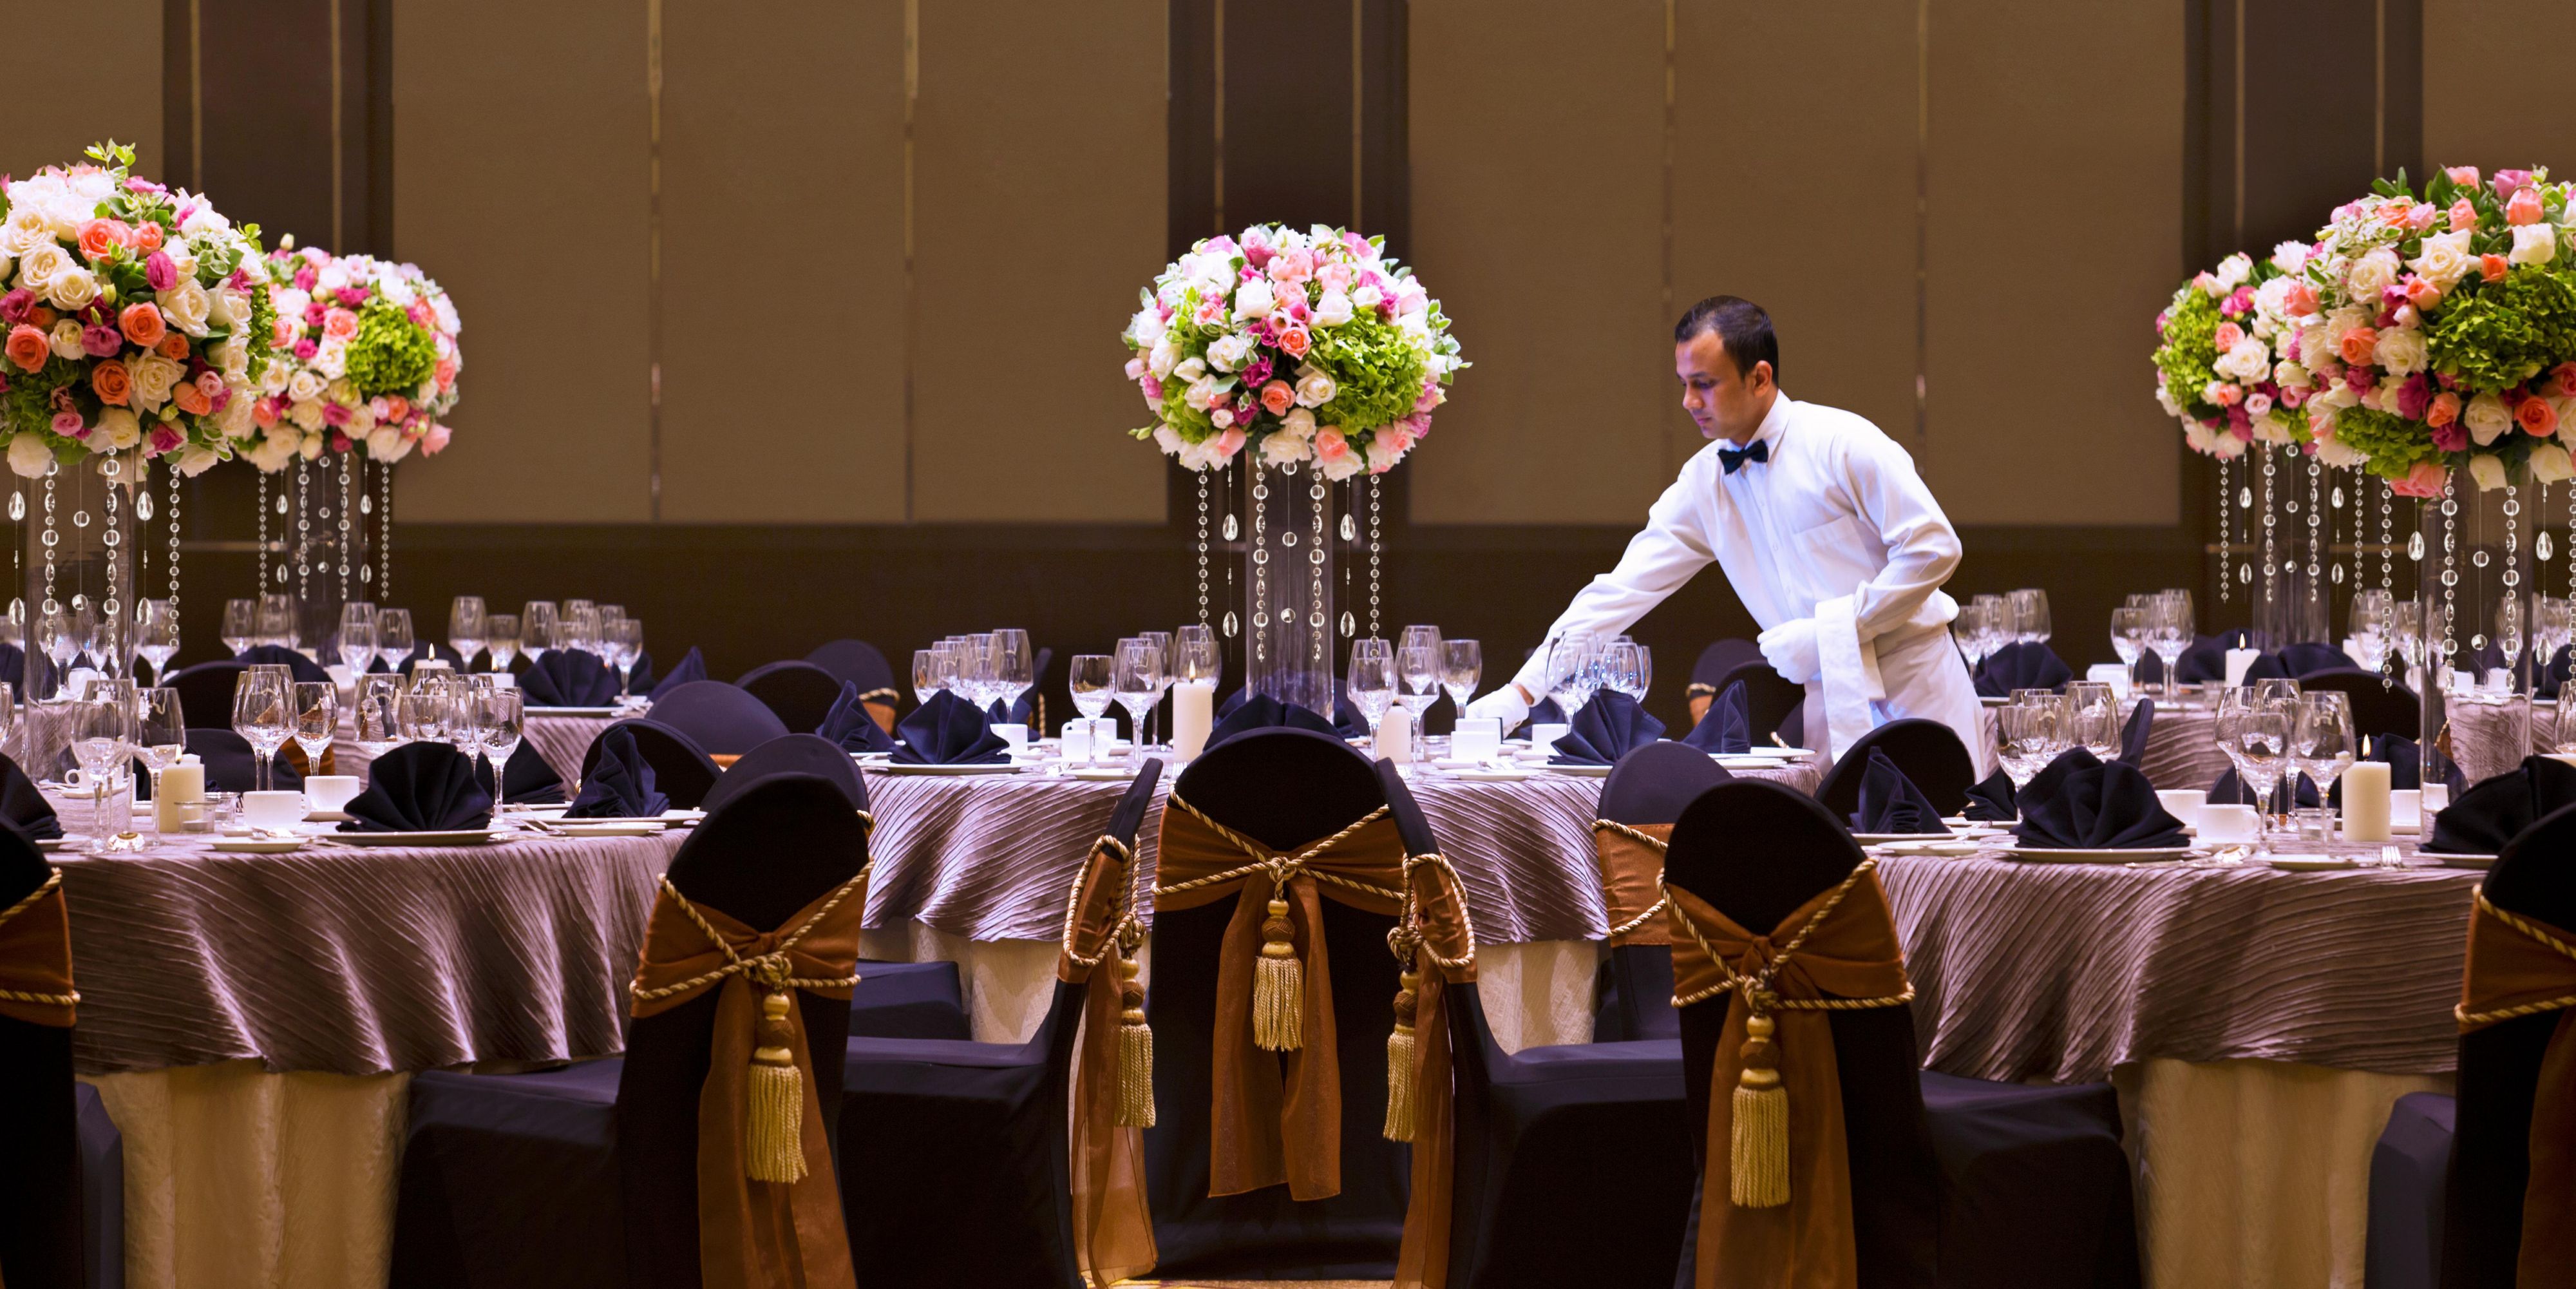 Bring your dream wedding to life with our grand versatile event spaces, complete with world-class facilities. Perfect for gatherings of up to 1,300 people, choose from our specially curated themes with an exquisite selection of cuisines made by our acclaimed chefs. Our wedding specialists are on hand to ensure your special day is seamless.